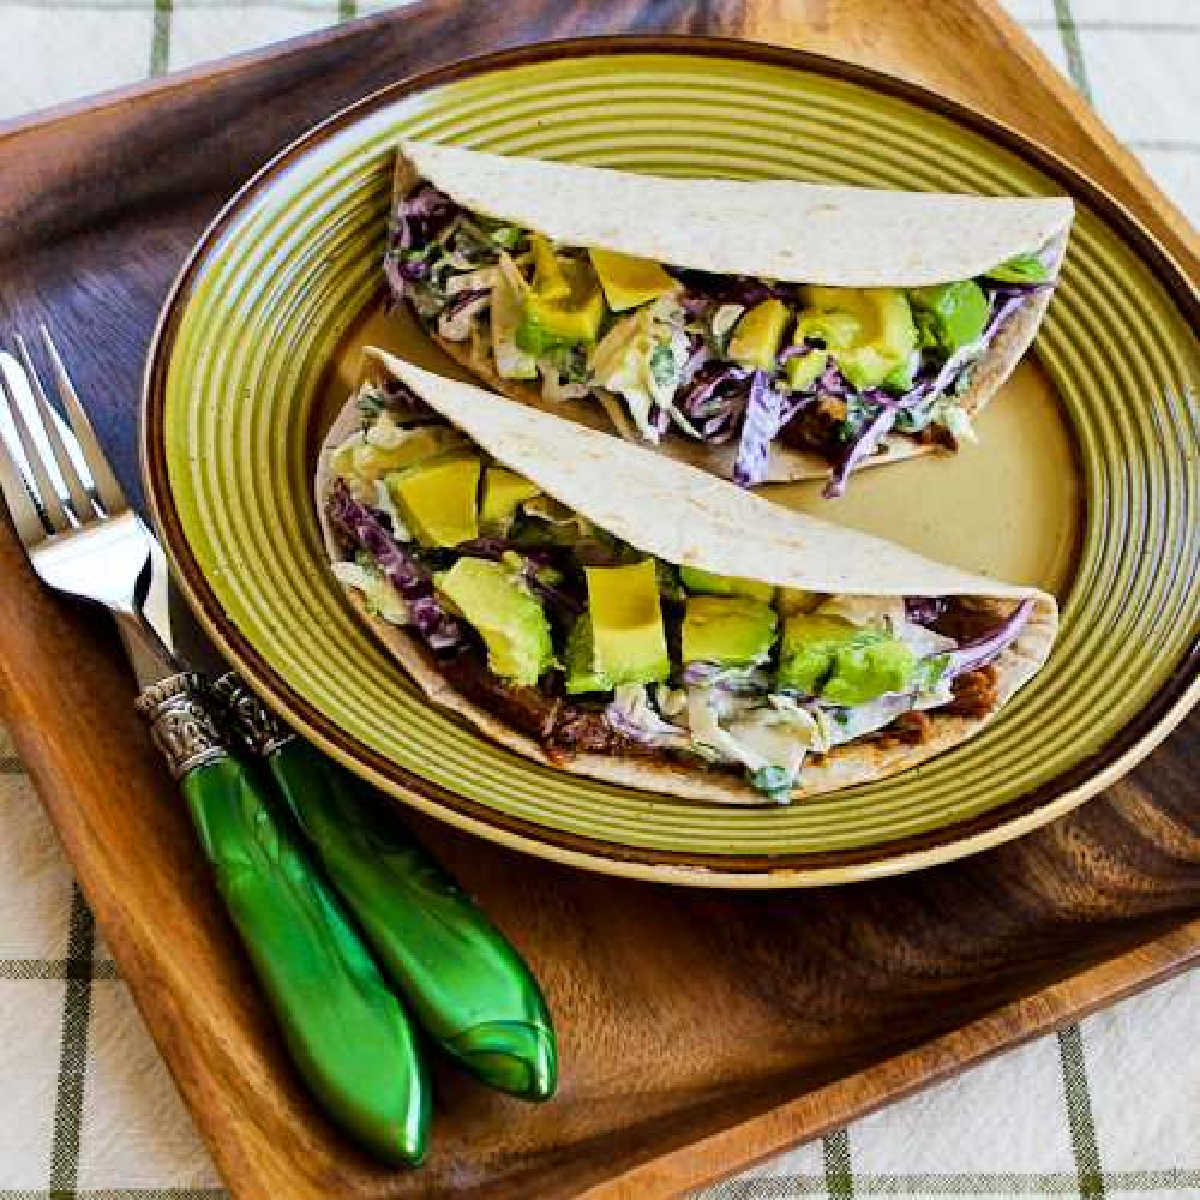 Square image for Shredded Beef Tacos with Spicy Slaw and Avocado shown on serving plate.